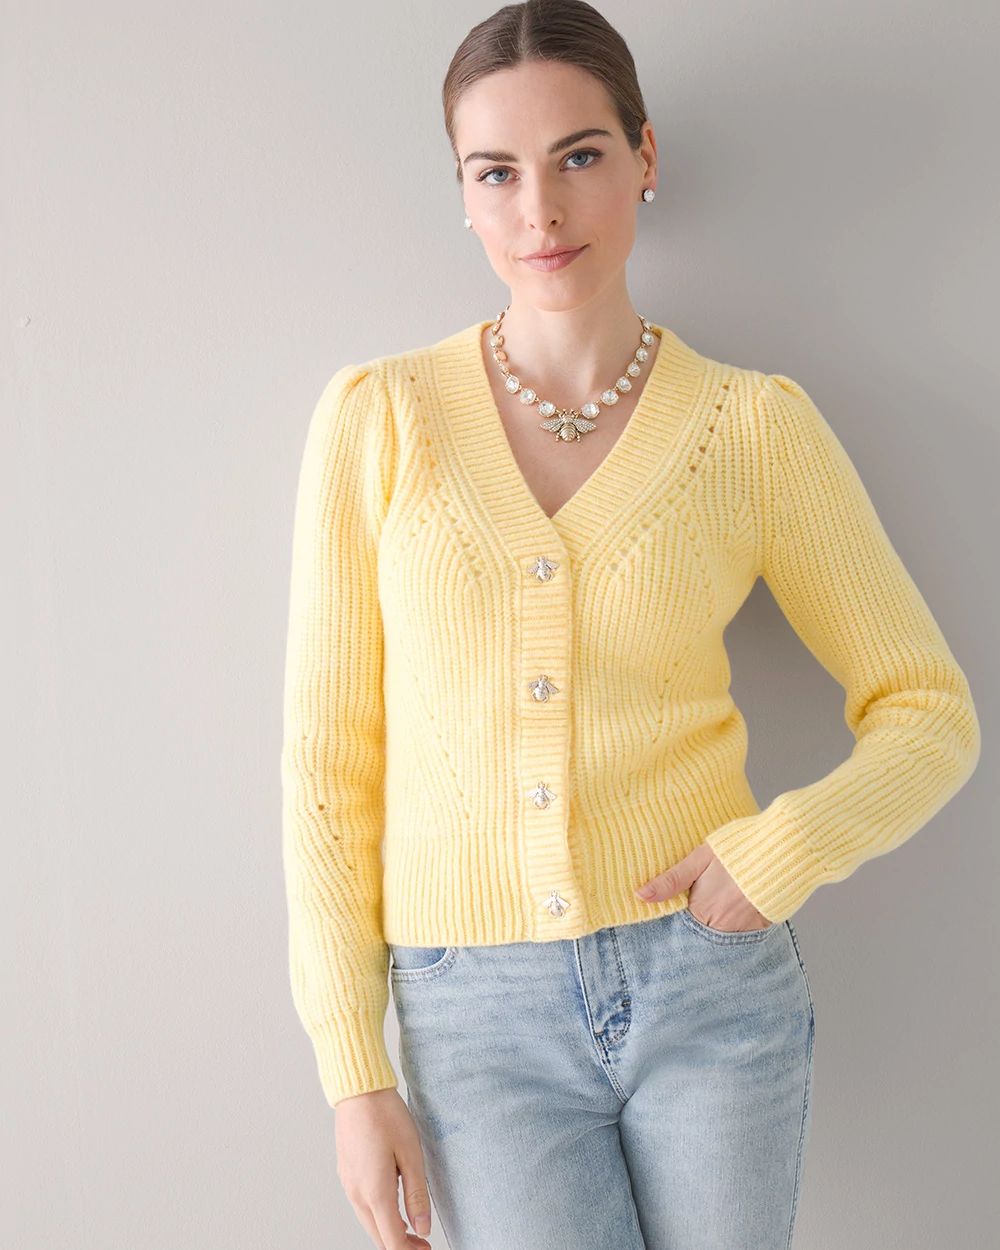 Petite Honey Bee Cardigan click to view larger image.